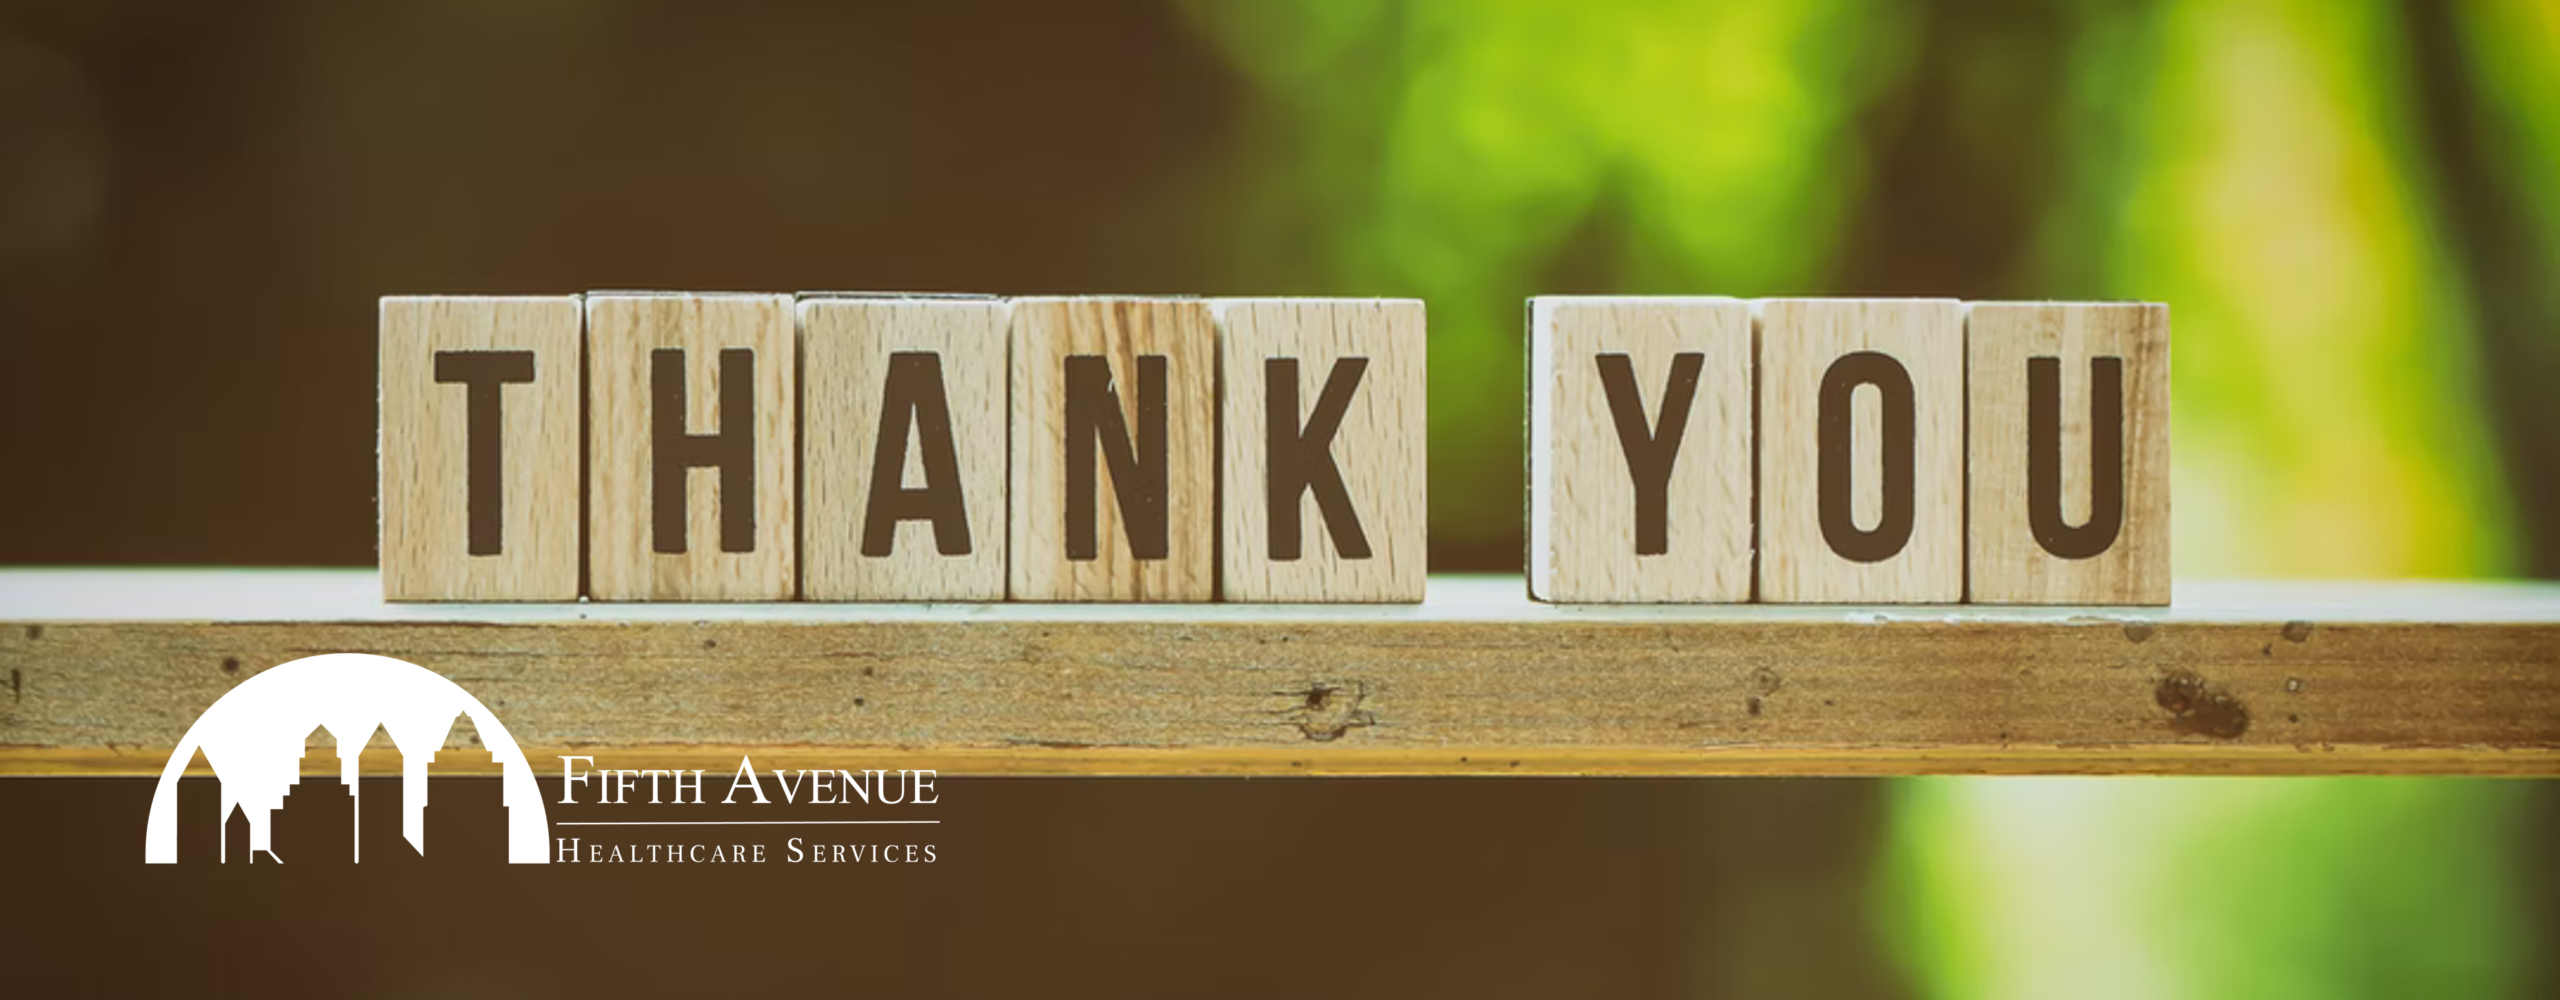 Thank you from Fifth Avenue Healthcare Services